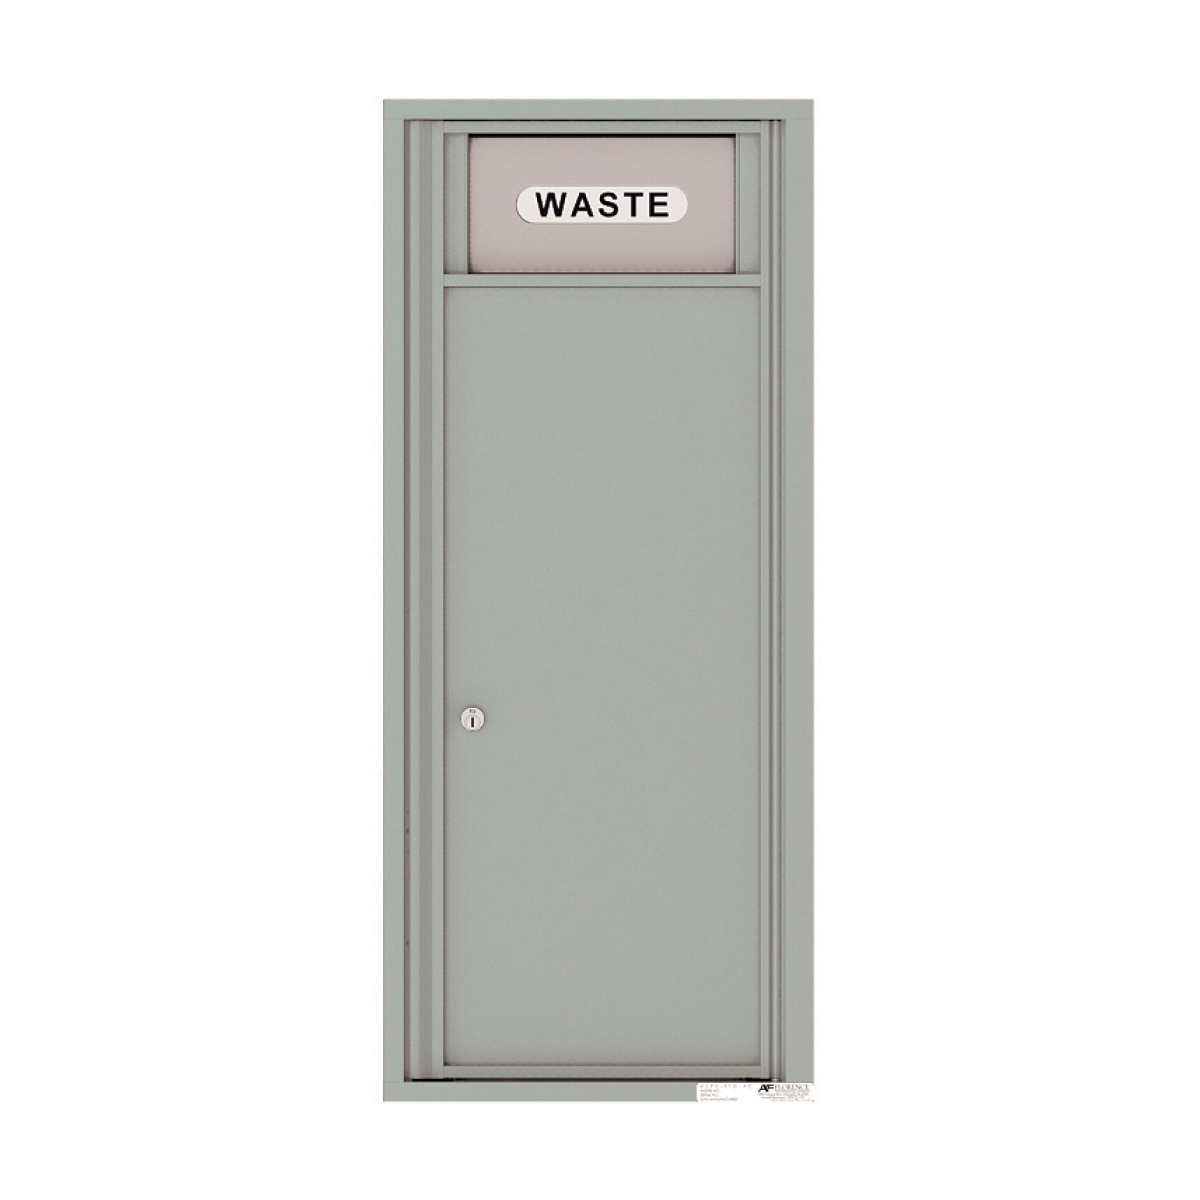 4C Mailboxes 4C11S-Bin Trash and Recycling Bin Product Image